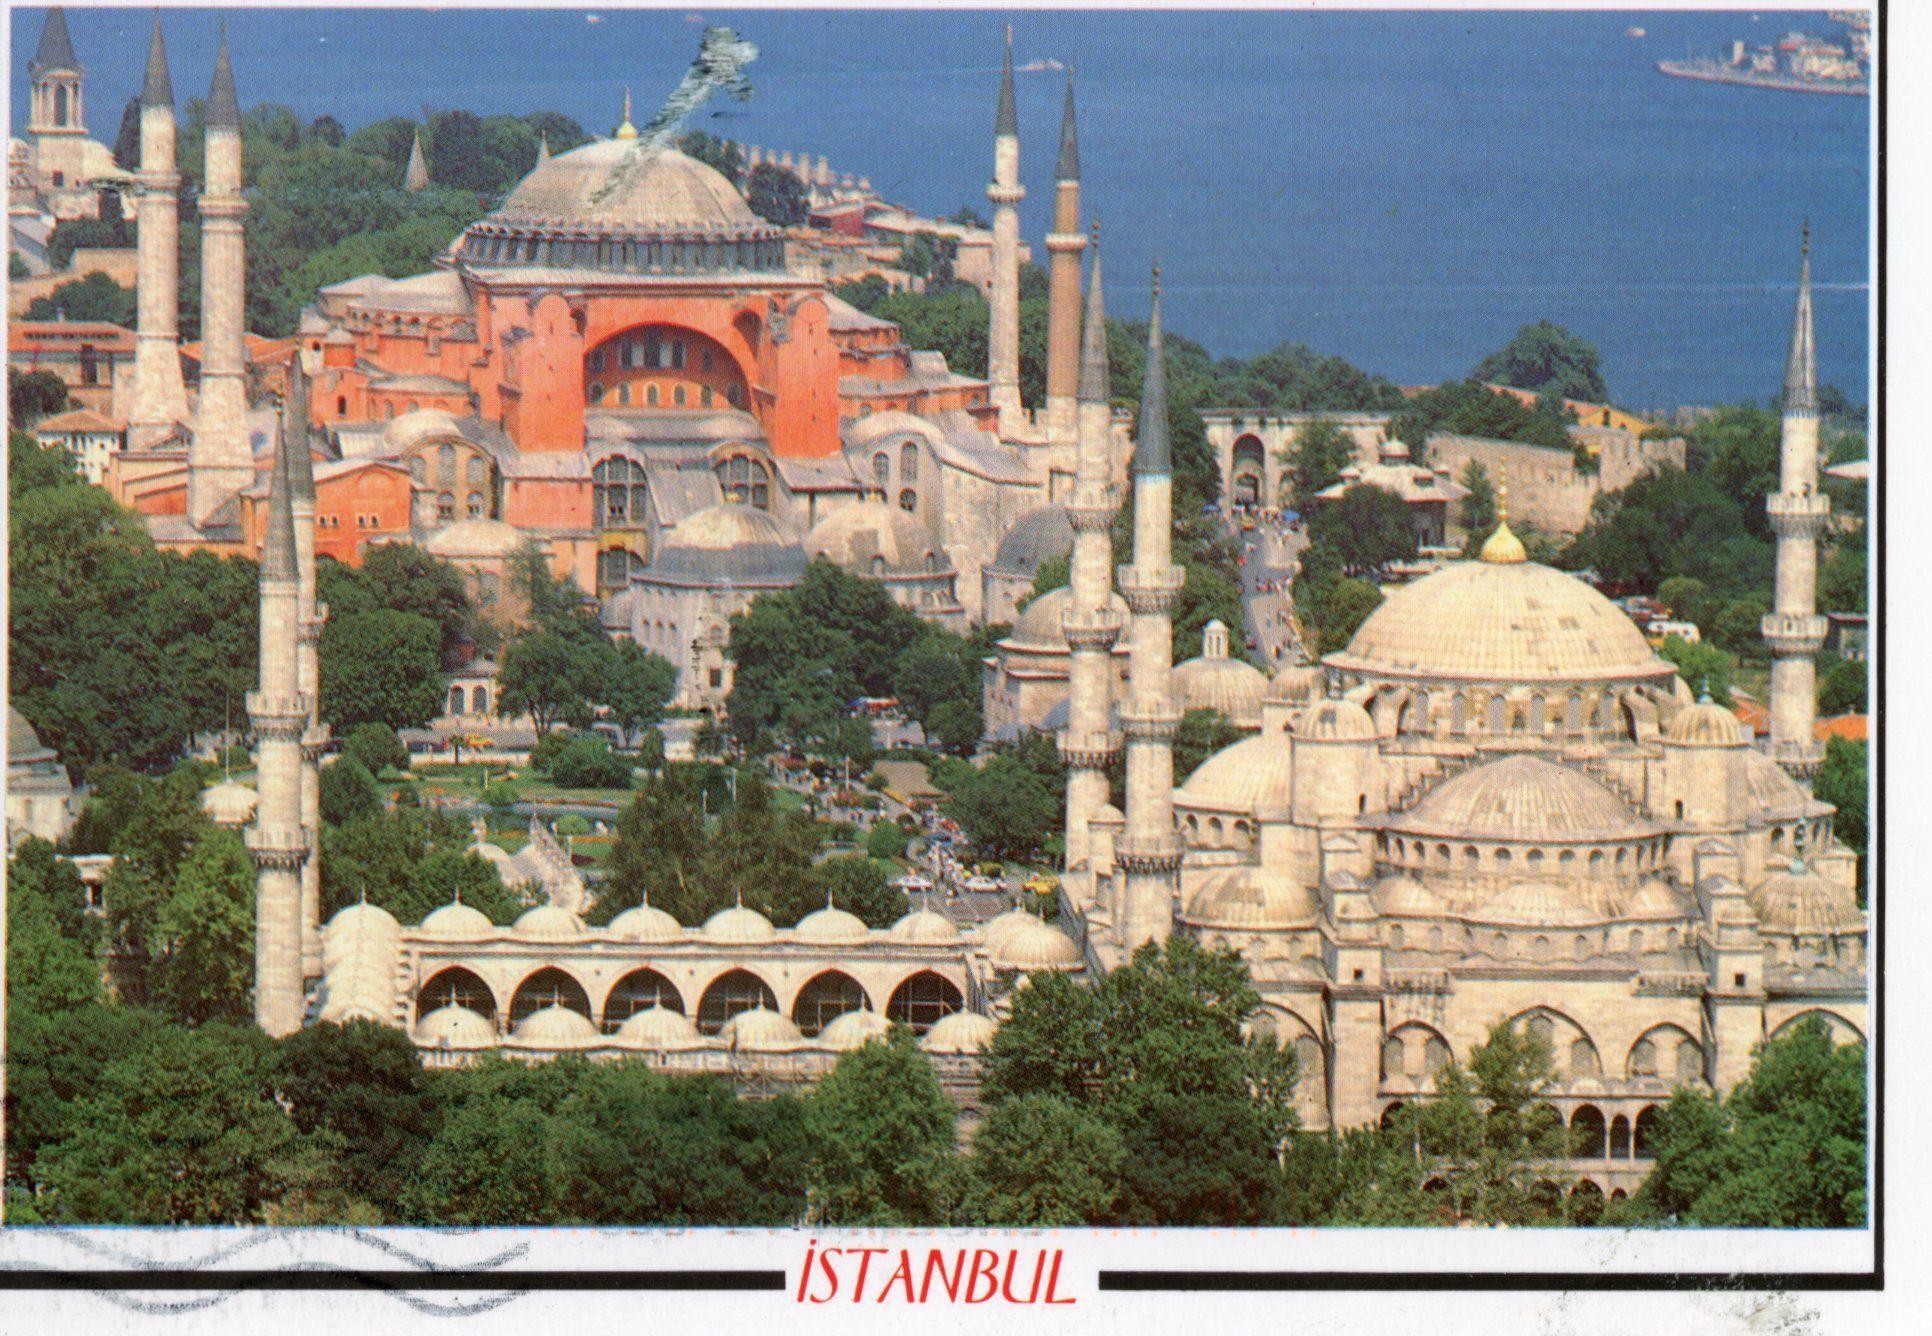 A postcard showing Istanbul's Hagia Sophia and the Blue Mosque. The colors are overly vibrant.